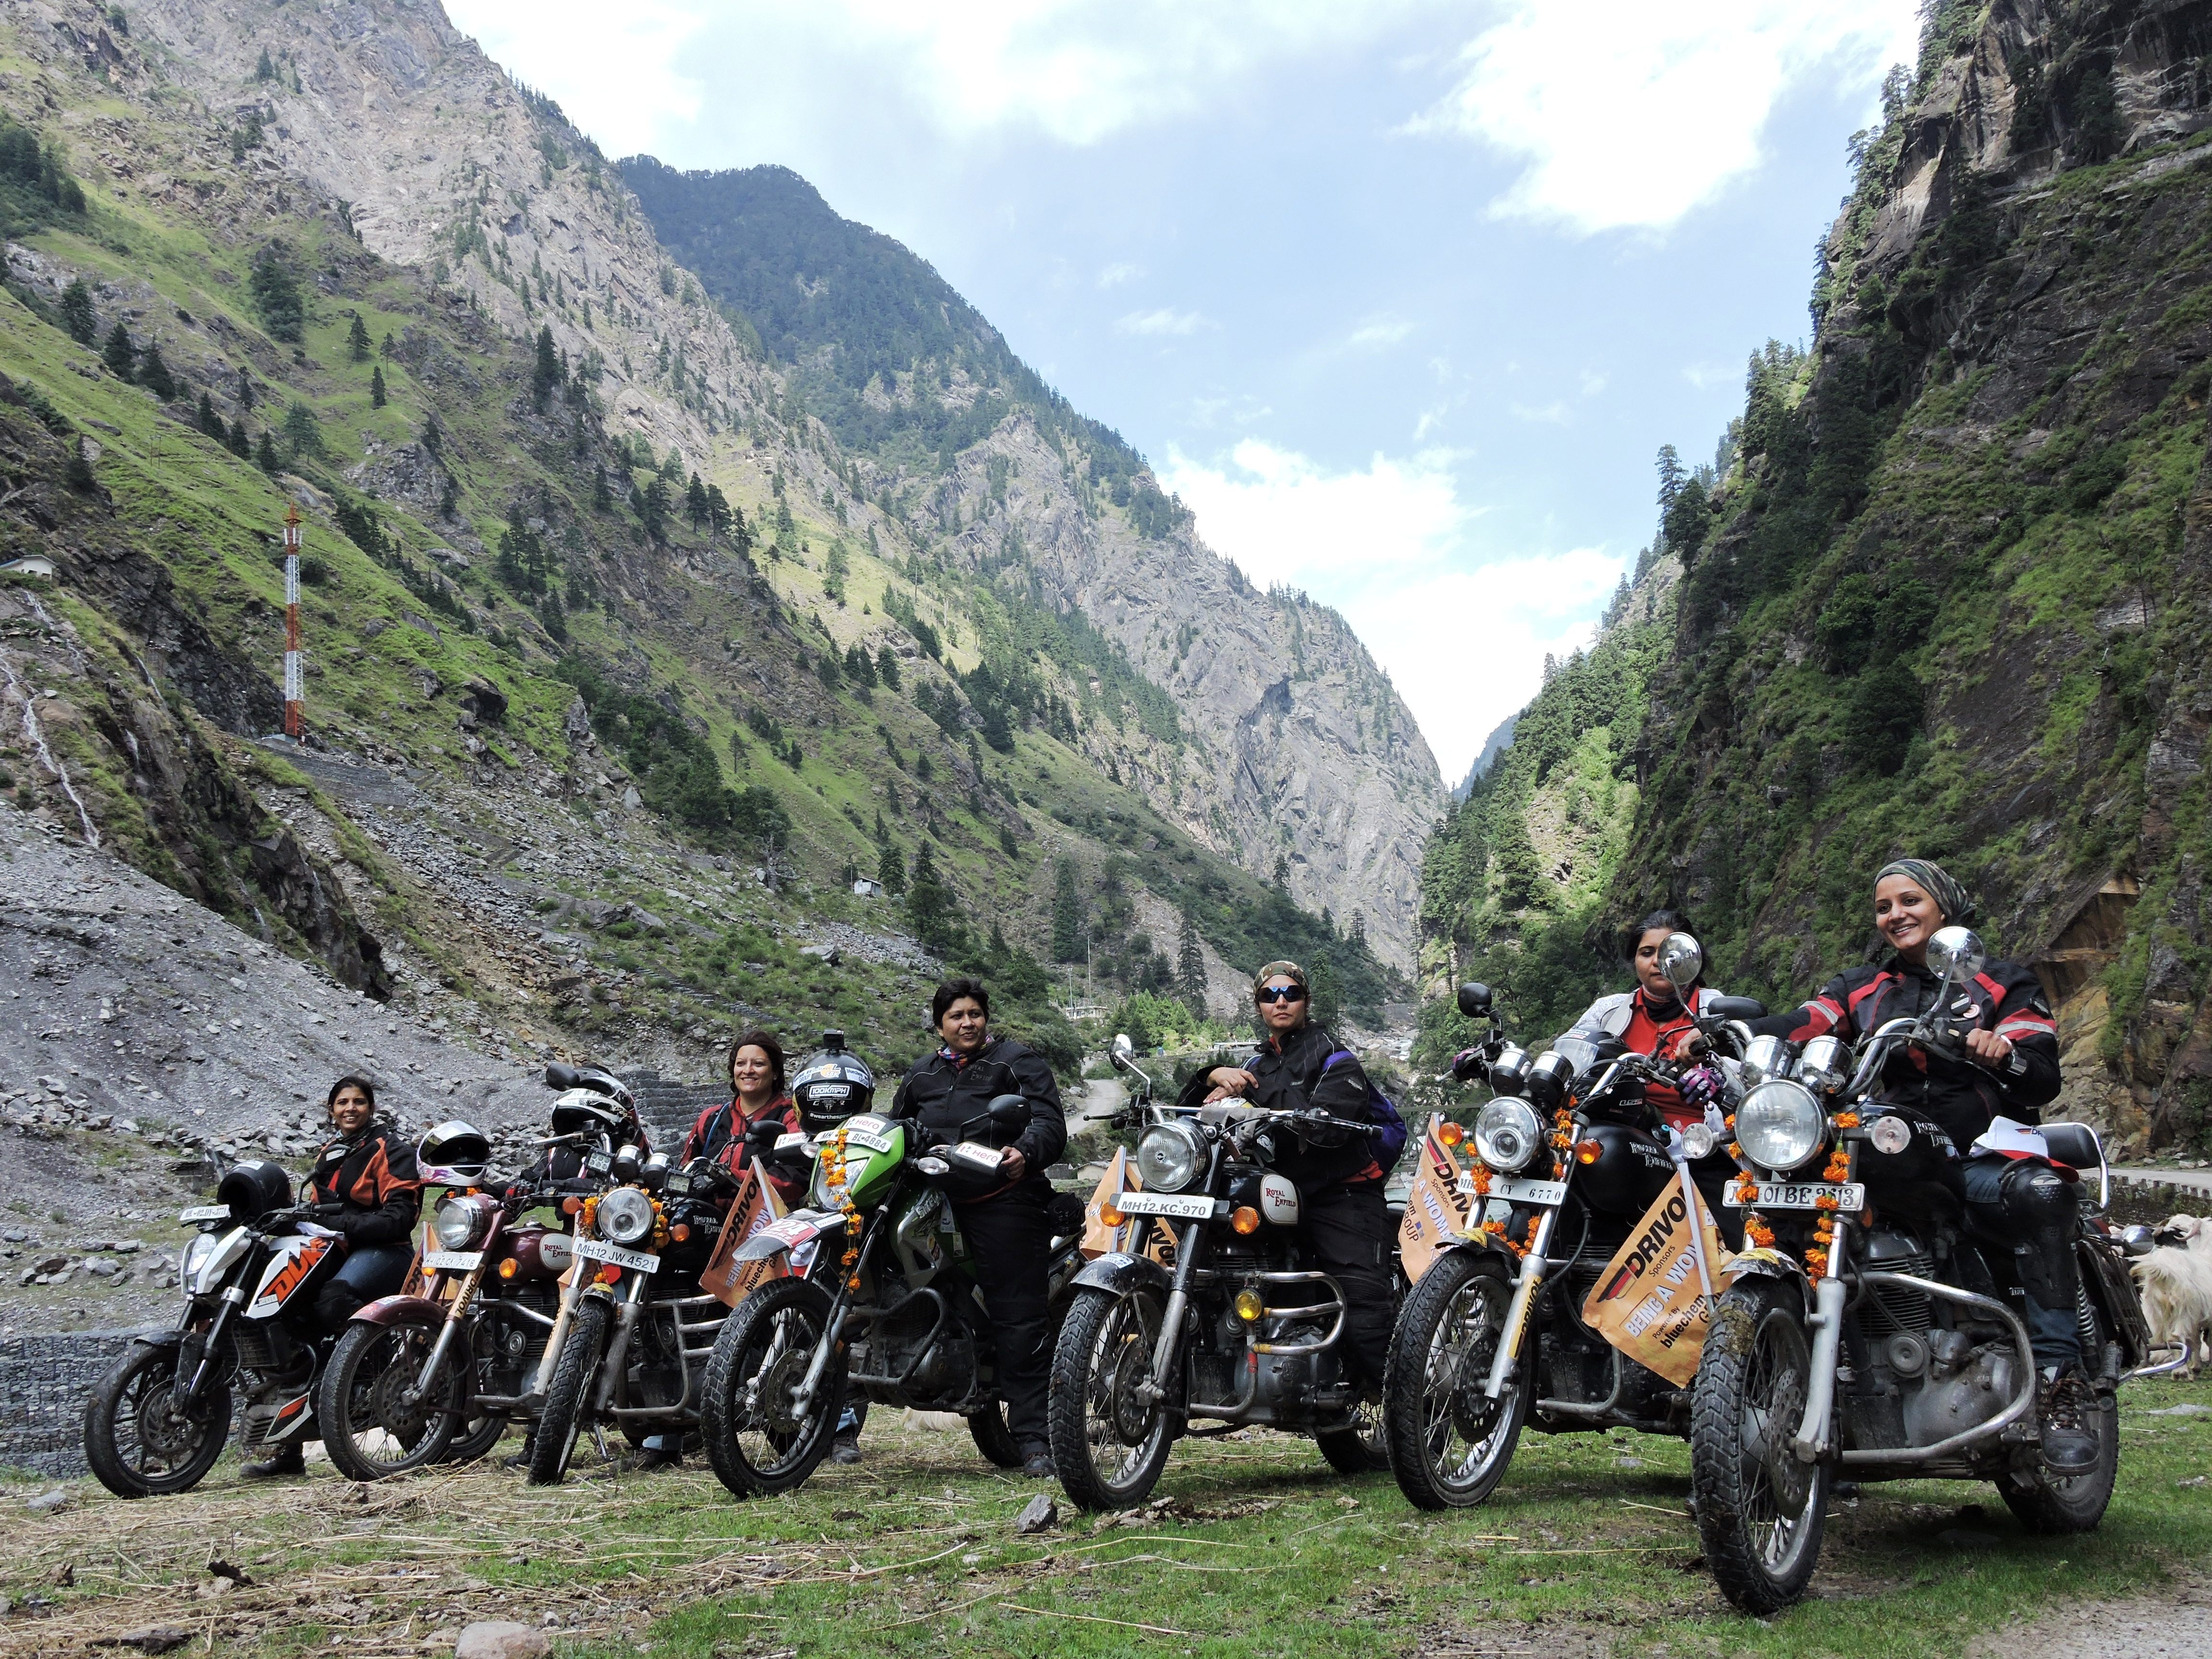 The women hopped on to their heavy-duty motor bikes and made their way from Dehradun, the state capital of Uttarakhand, towards the highest motorable pass at 18,399 ft above sea level.